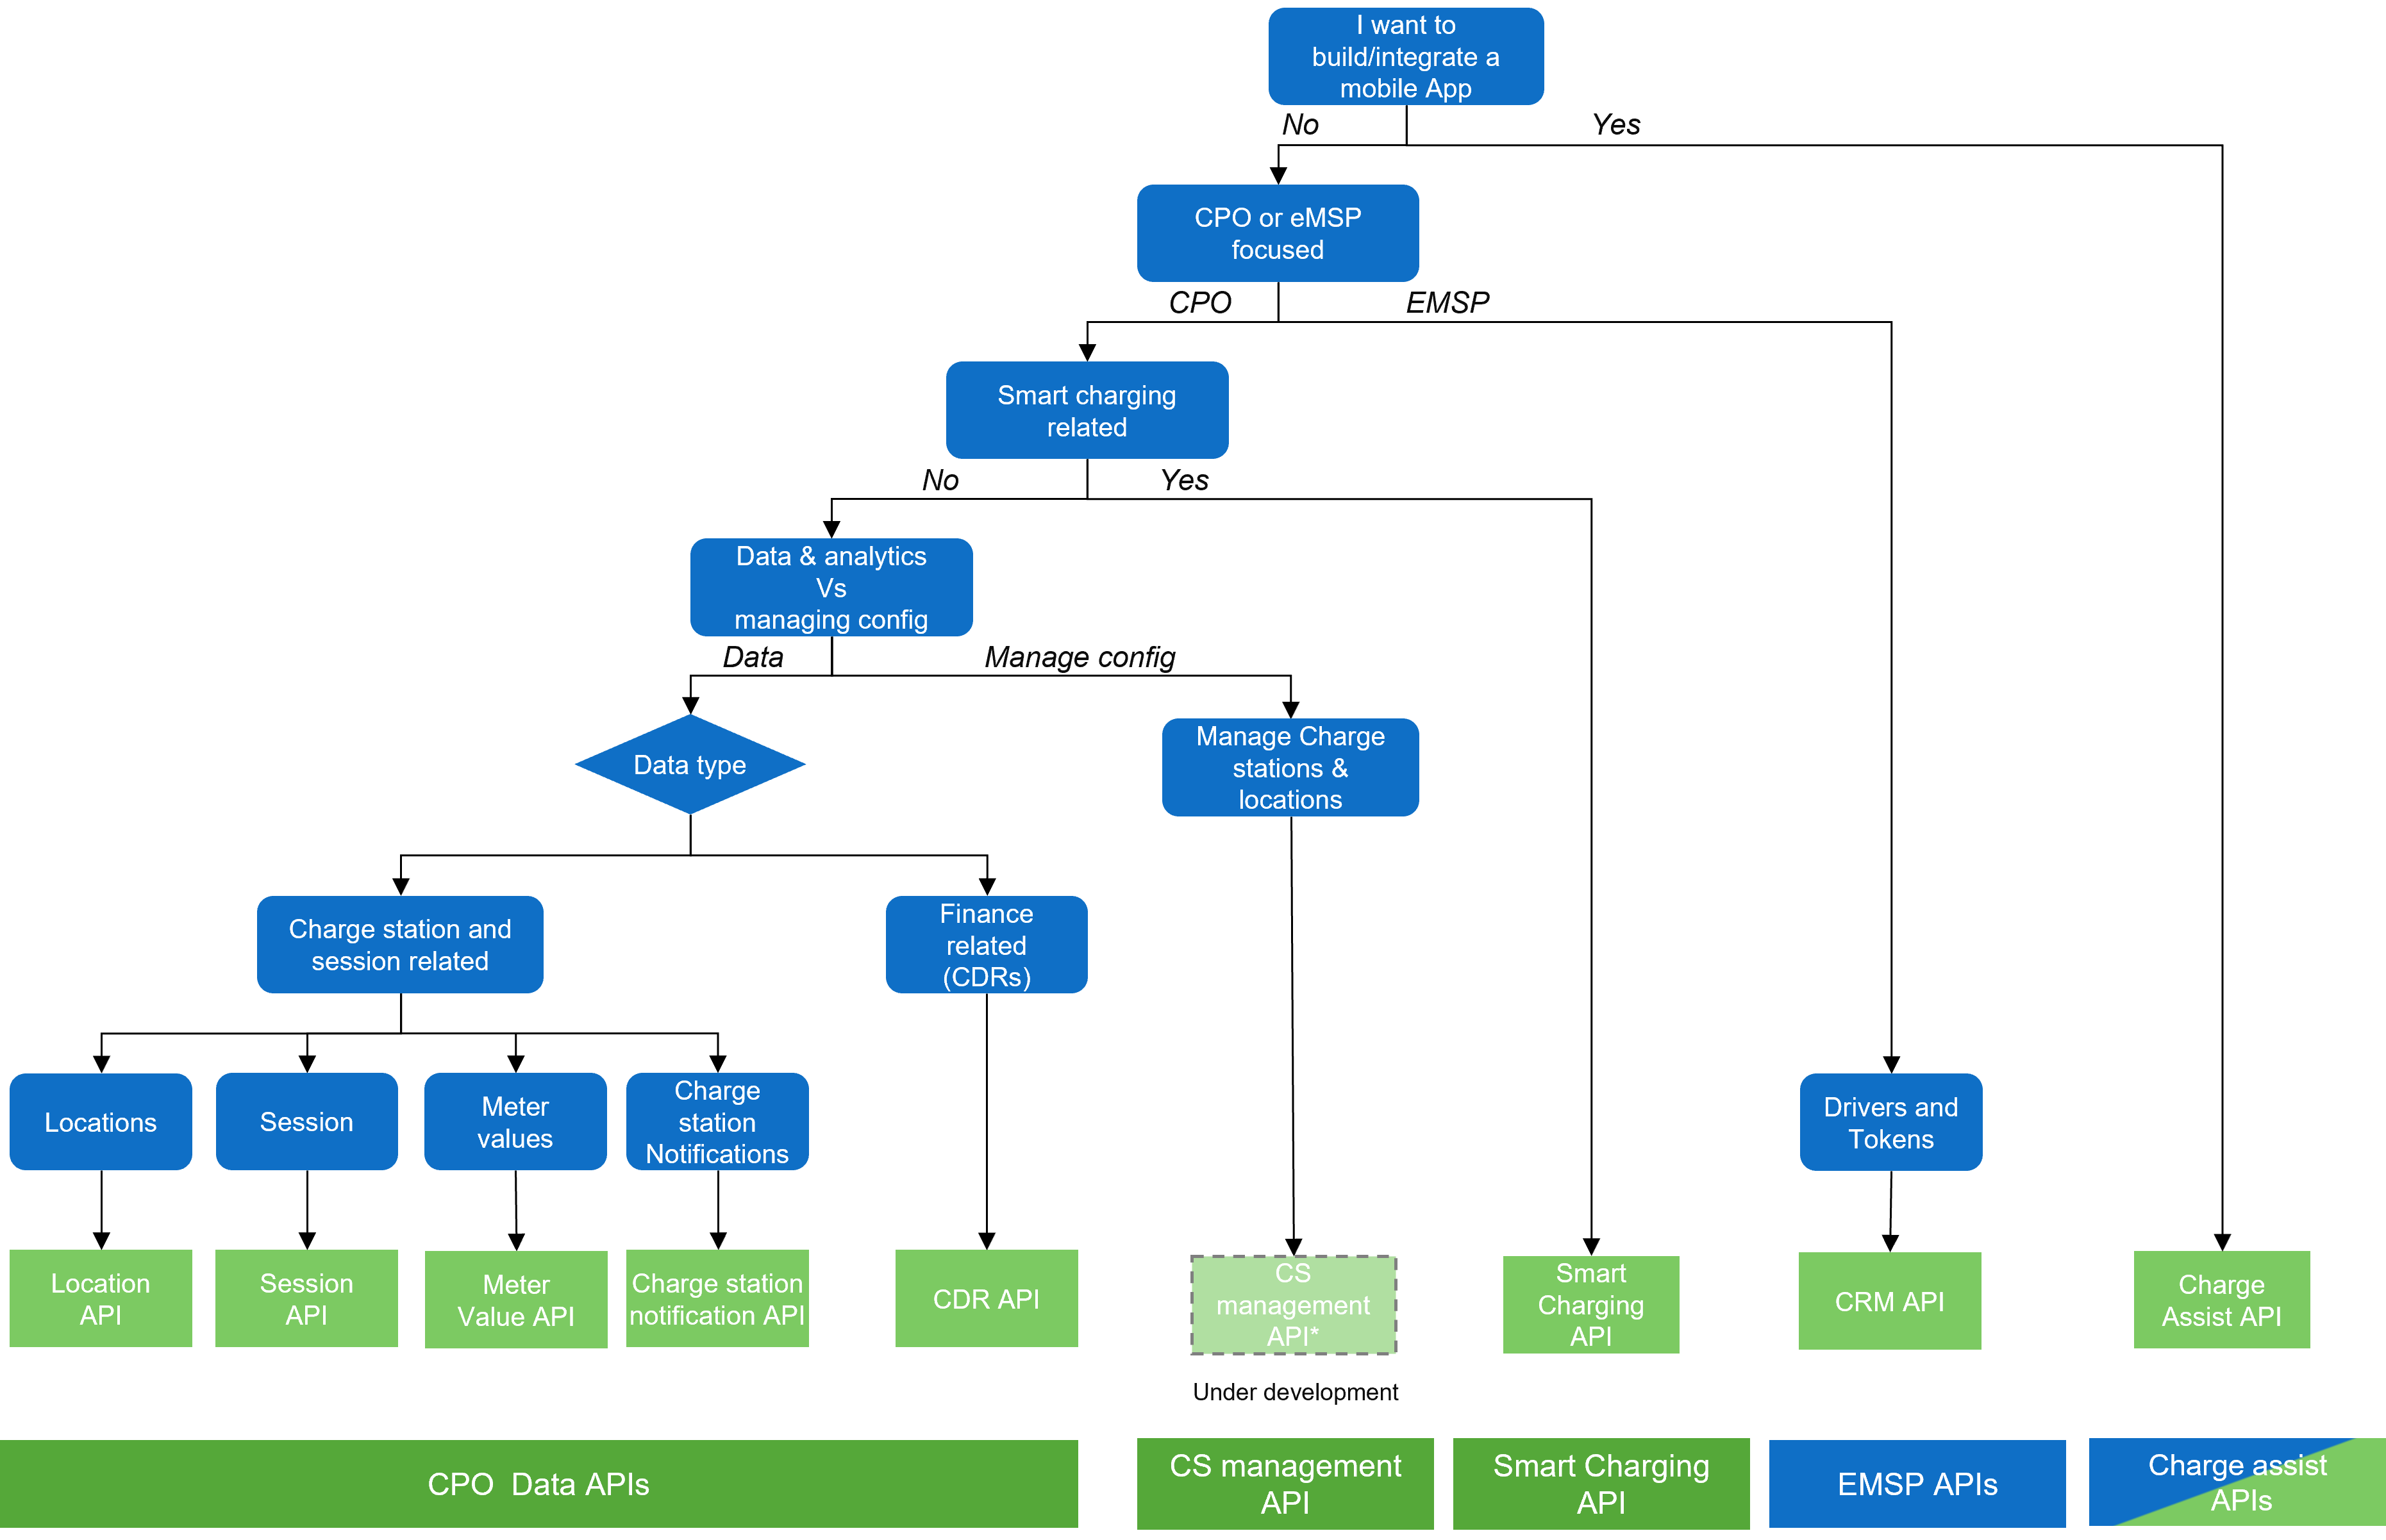 Decision Tree - which API to use